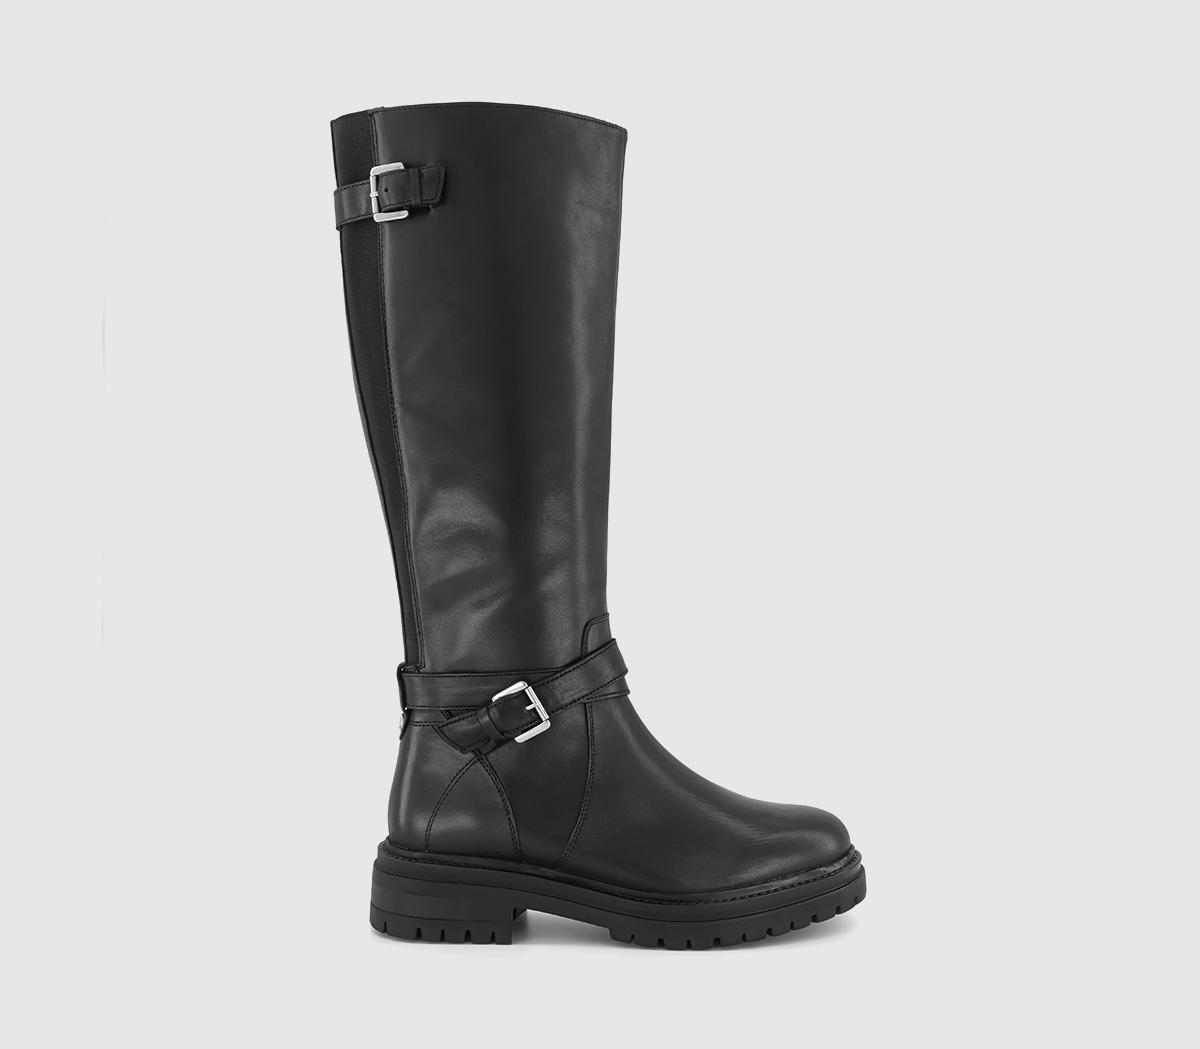 Krissy Buckle Strap Knee High Rider Boots Black Leather